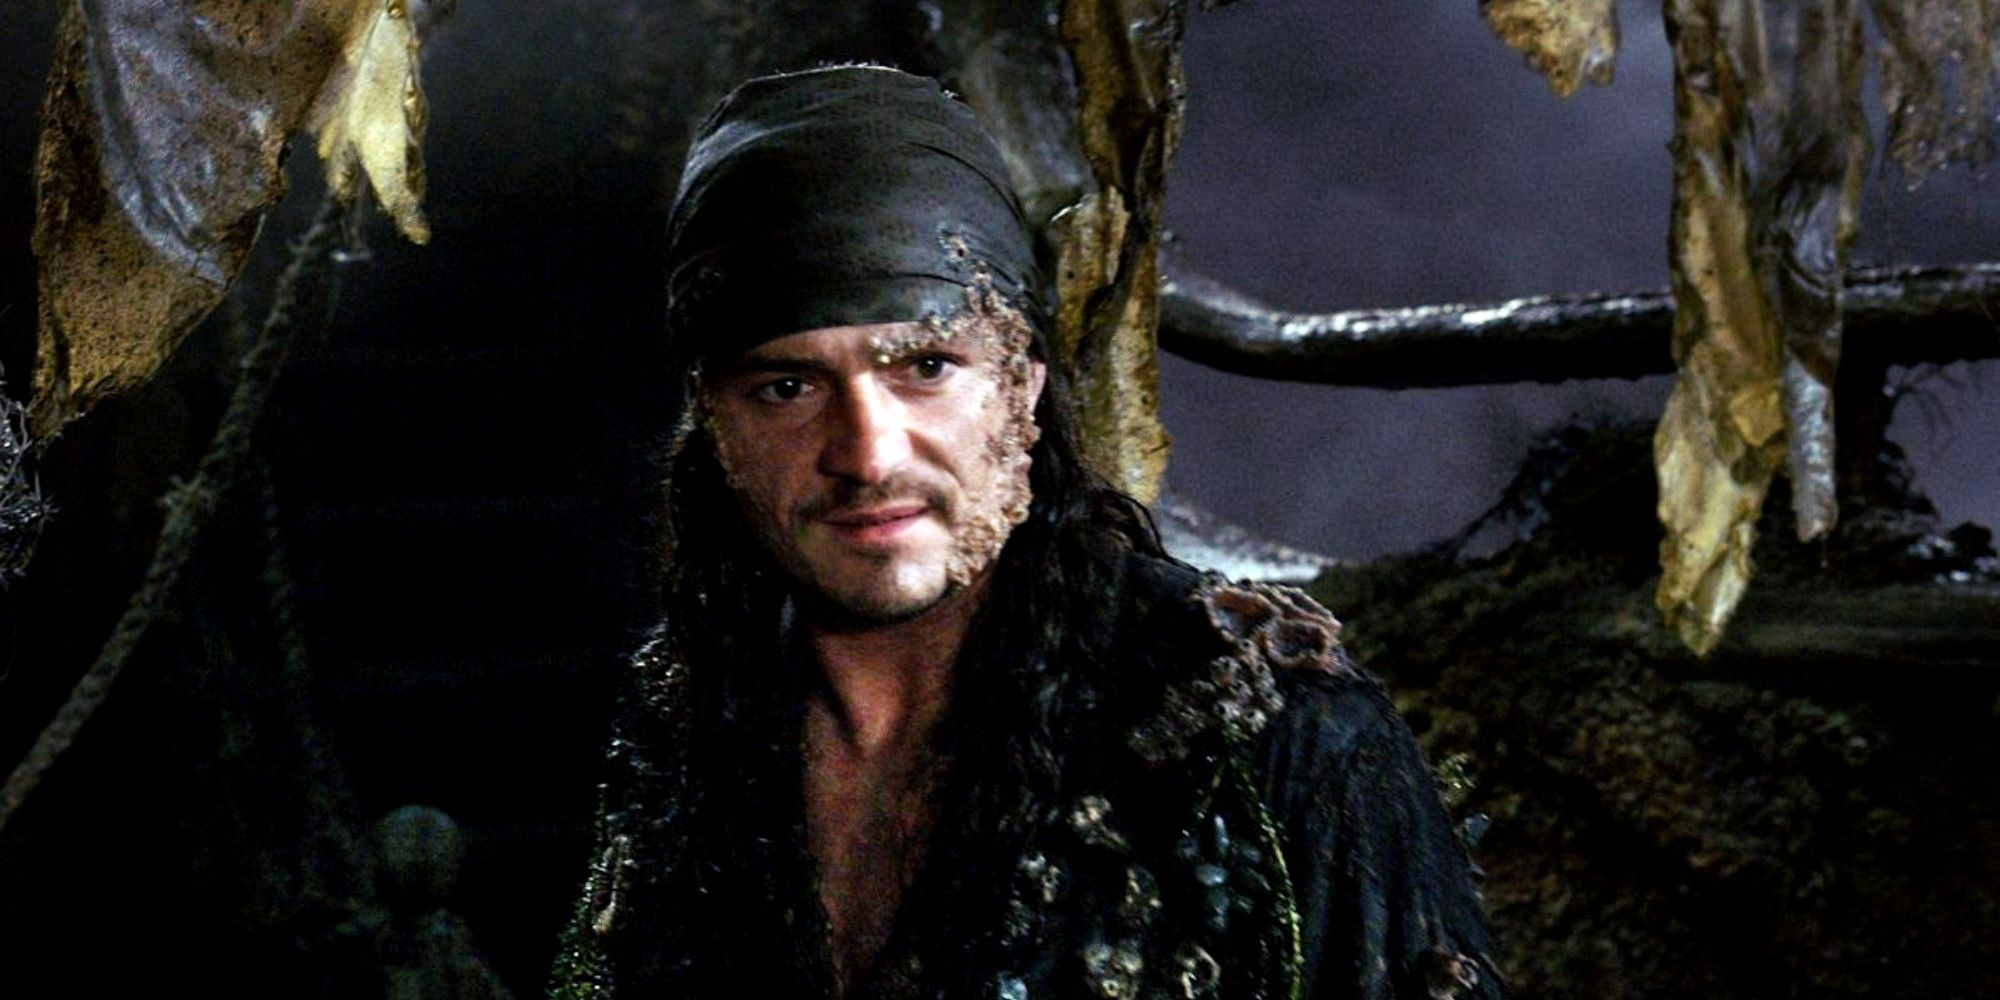 Will Turner covered in barnacles on the Flying Dutchman in Pirates of the Caribbean